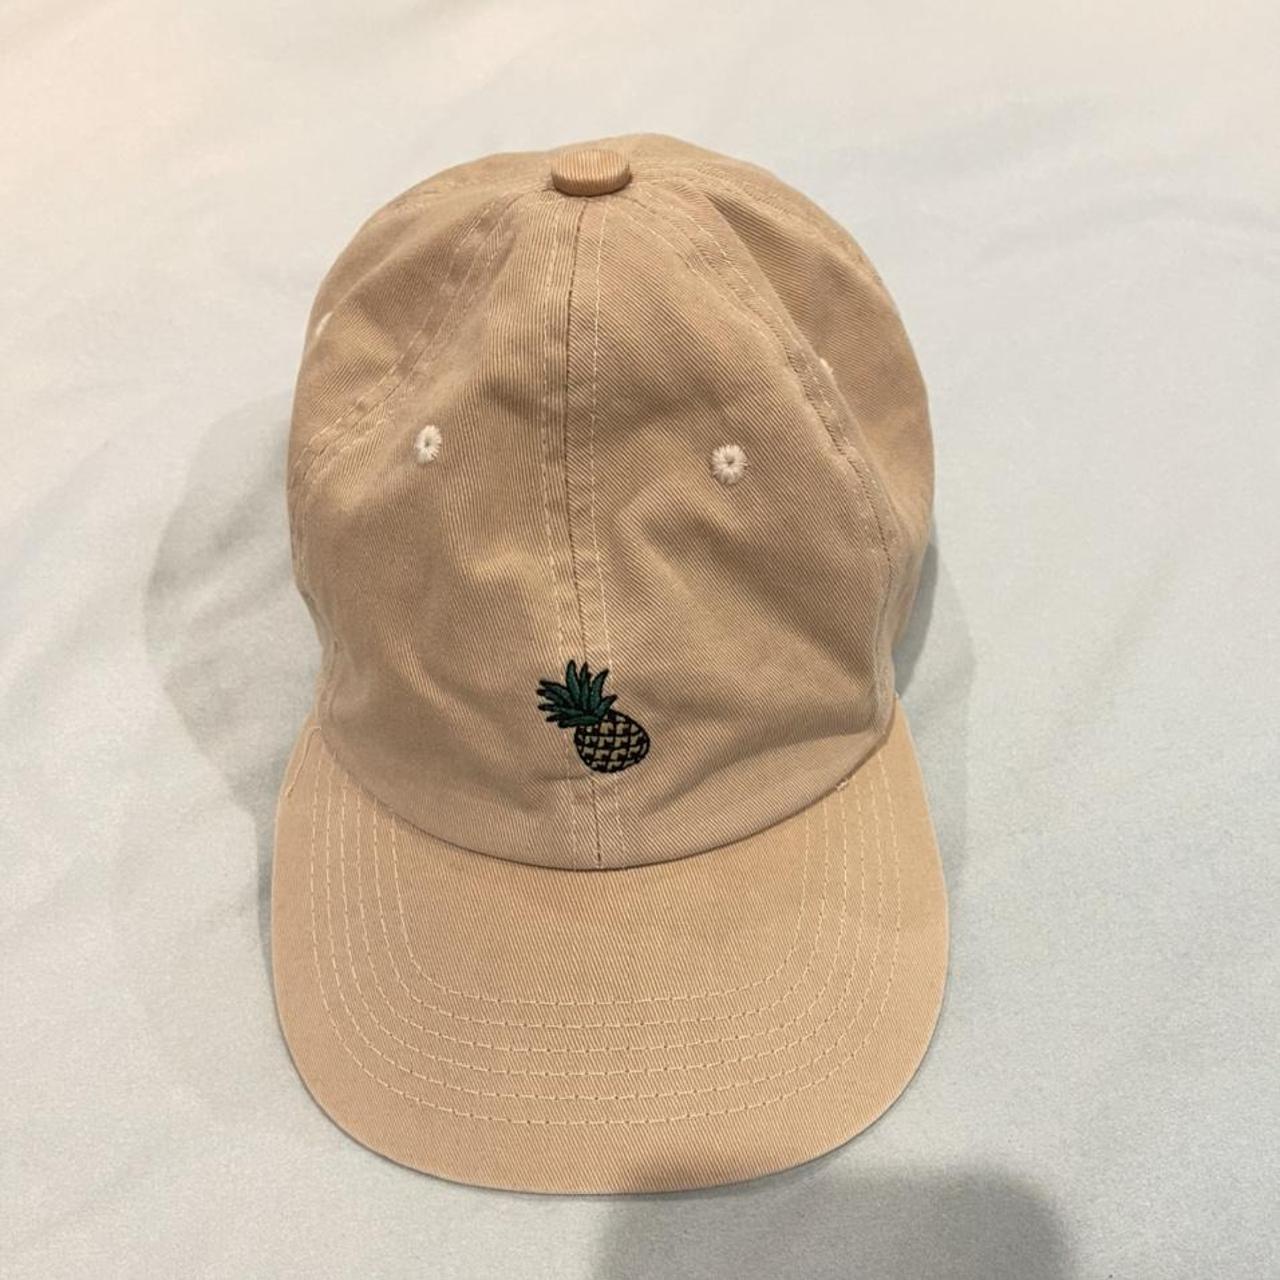 Product Image 2 - unif pineapple hat 🍍
beige tan